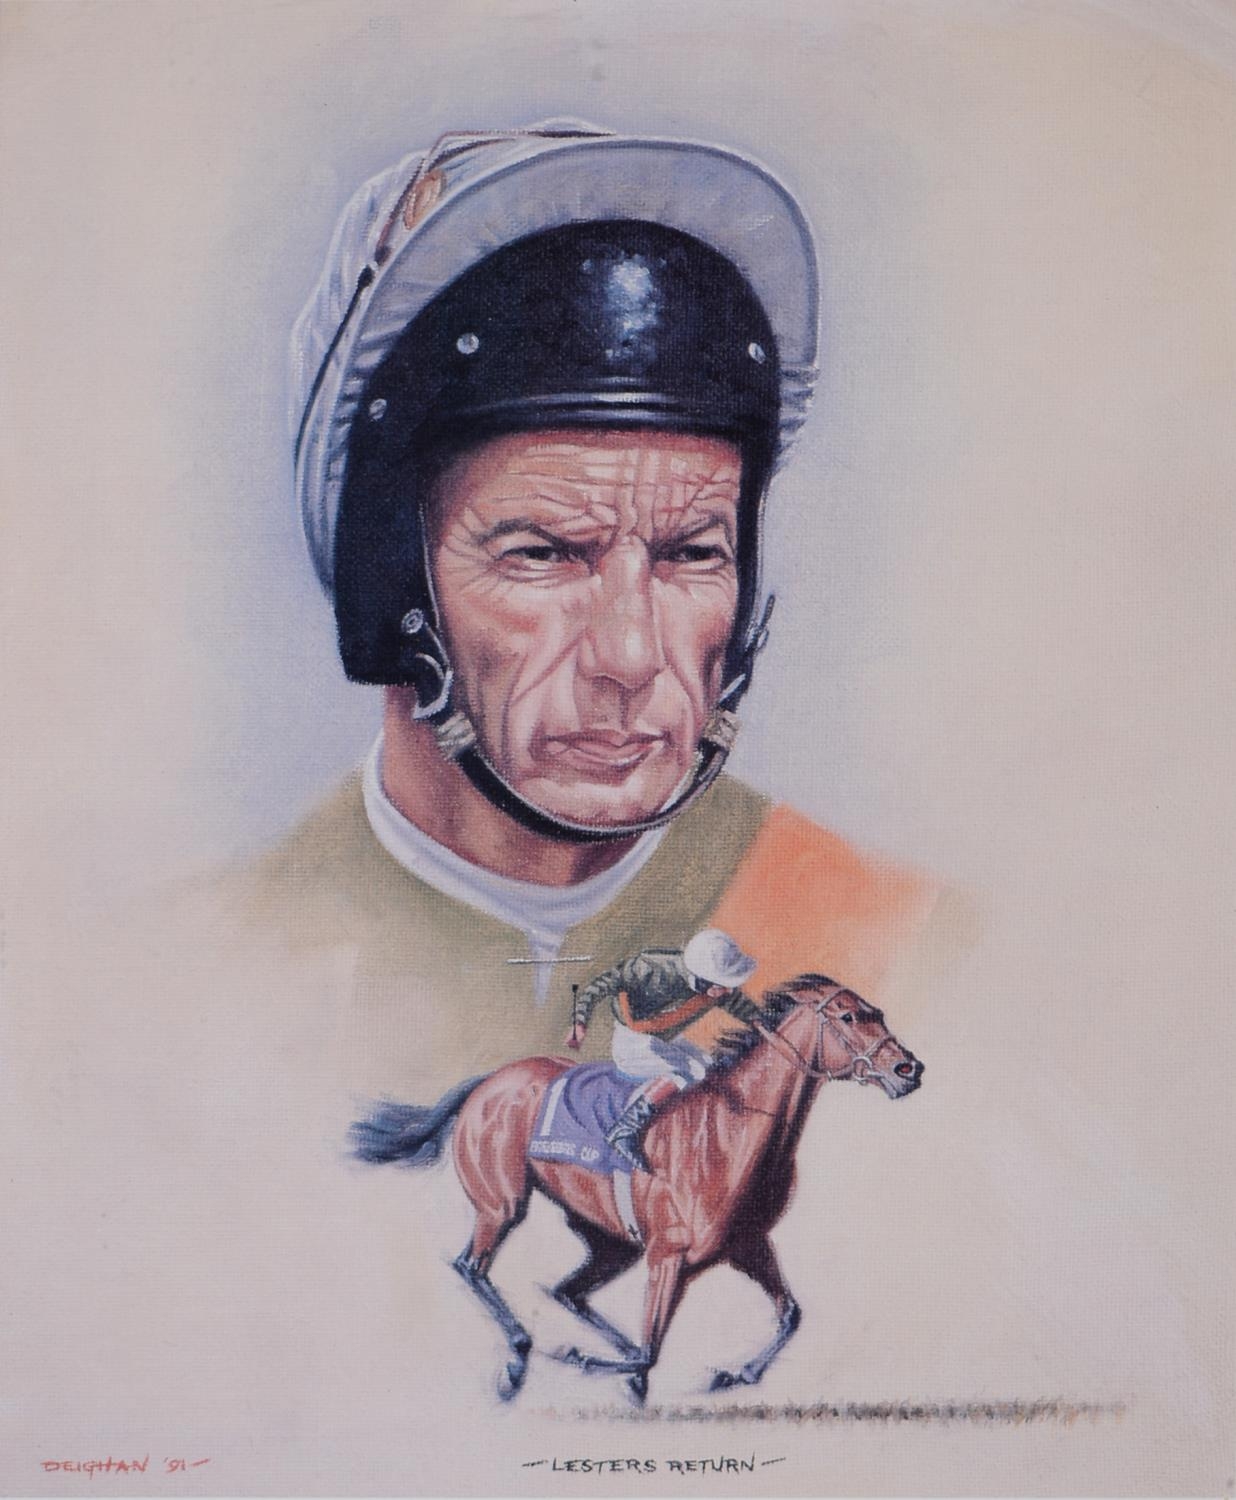 Horse Racing - Lester Piggott (1935-2022), a signed limited edition print, Lester Returns by